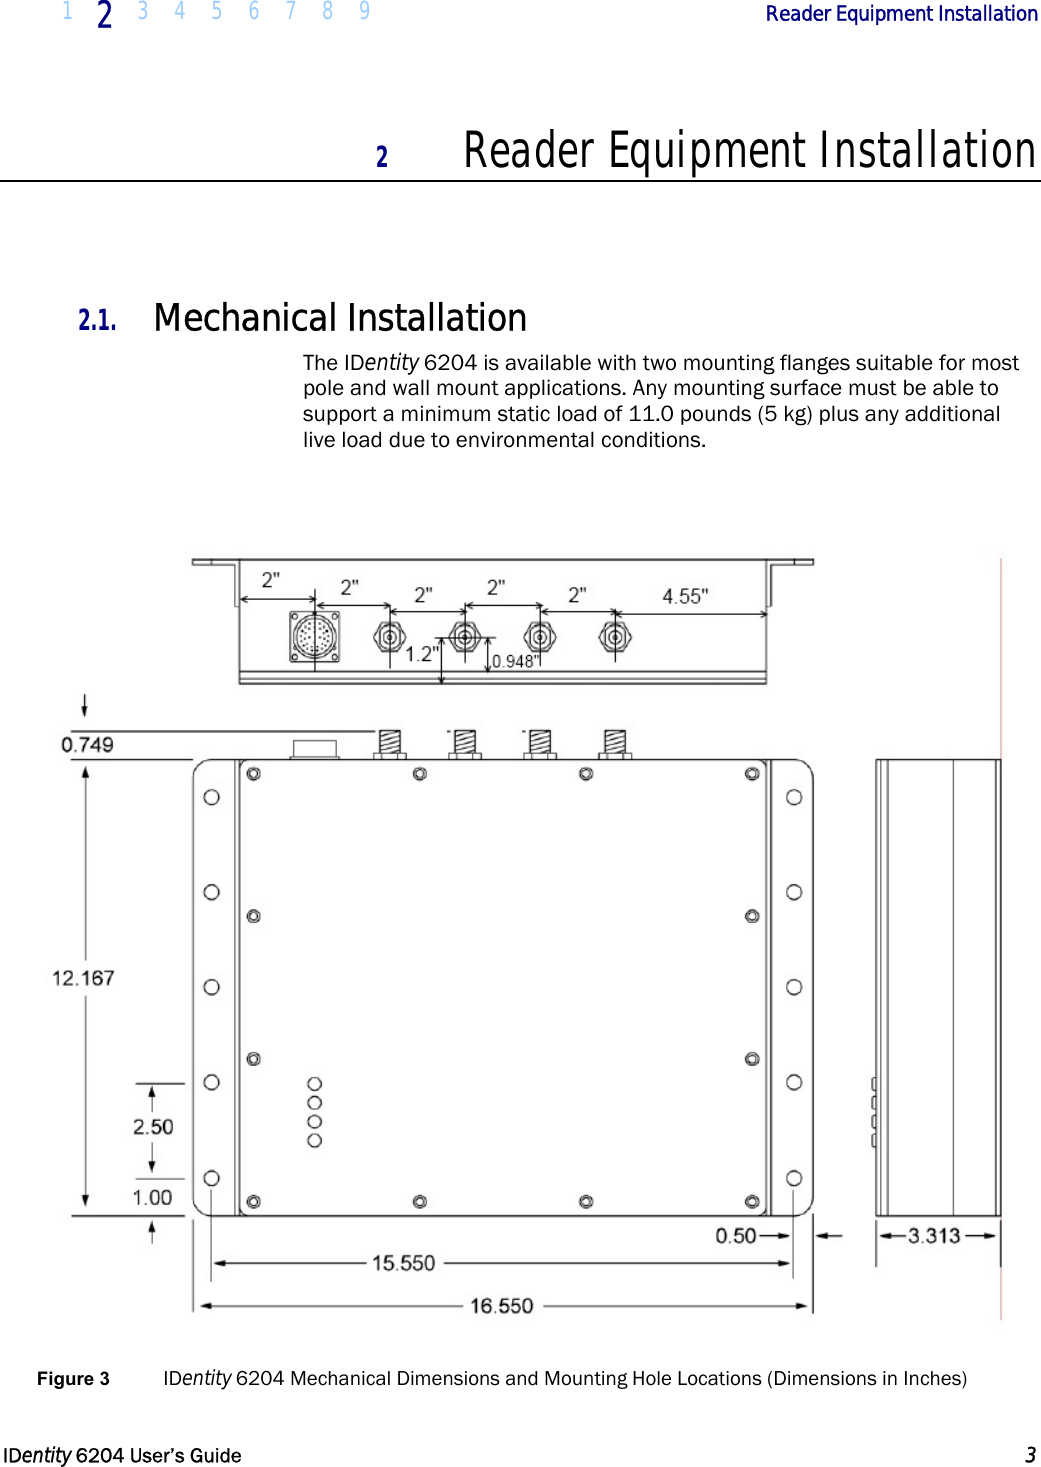  1  2  3 4 5 6 7 8 9             Reader Equipment Installation   IDentity 6204 User’s Guide  3  2 Reader Equipment Installation   2.1. Mechanical Installation The IDentity 6204 is available with two mounting flanges suitable for most pole and wall mount applications. Any mounting surface must be able to support a minimum static load of 11.0 pounds (5 kg) plus any additional live load due to environmental conditions.   Figure 3  IDentity 6204 Mechanical Dimensions and Mounting Hole Locations (Dimensions in Inches) 